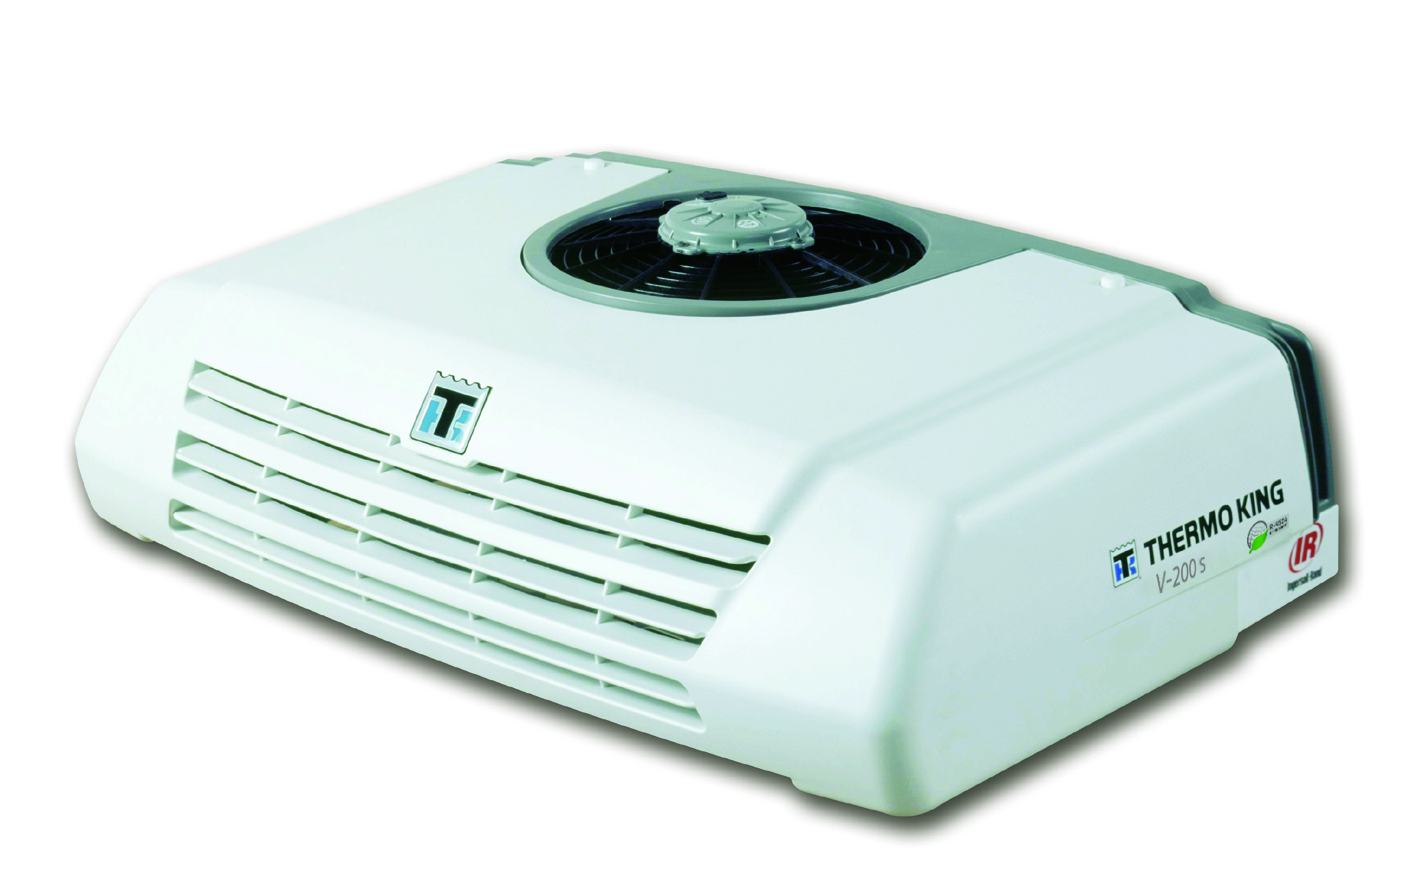 Thermo King V-200s